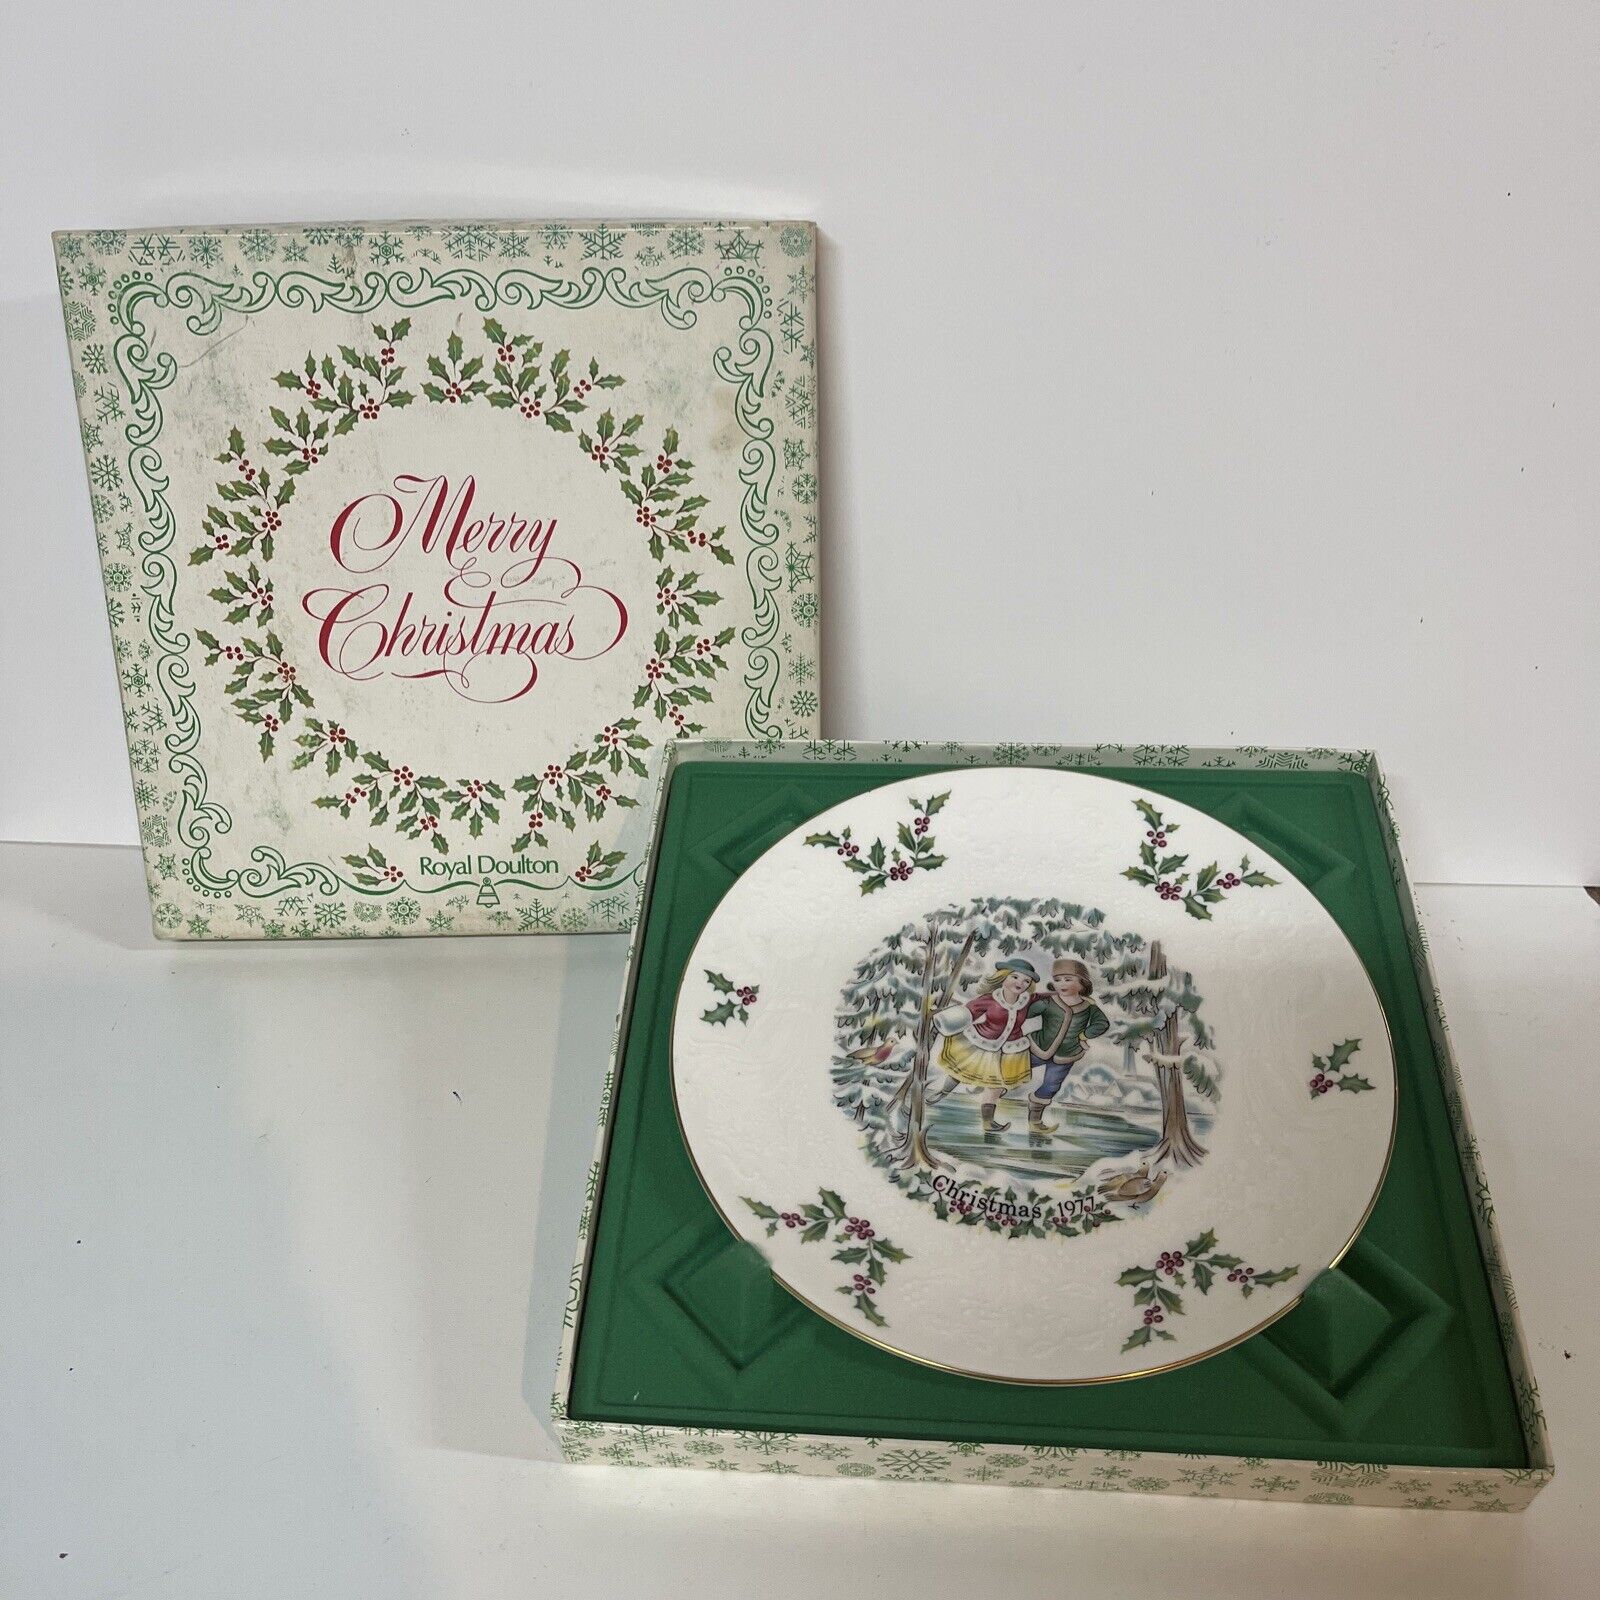 Vintage 1977 Royal Doulton Christmas Plate First In Series with Original Box